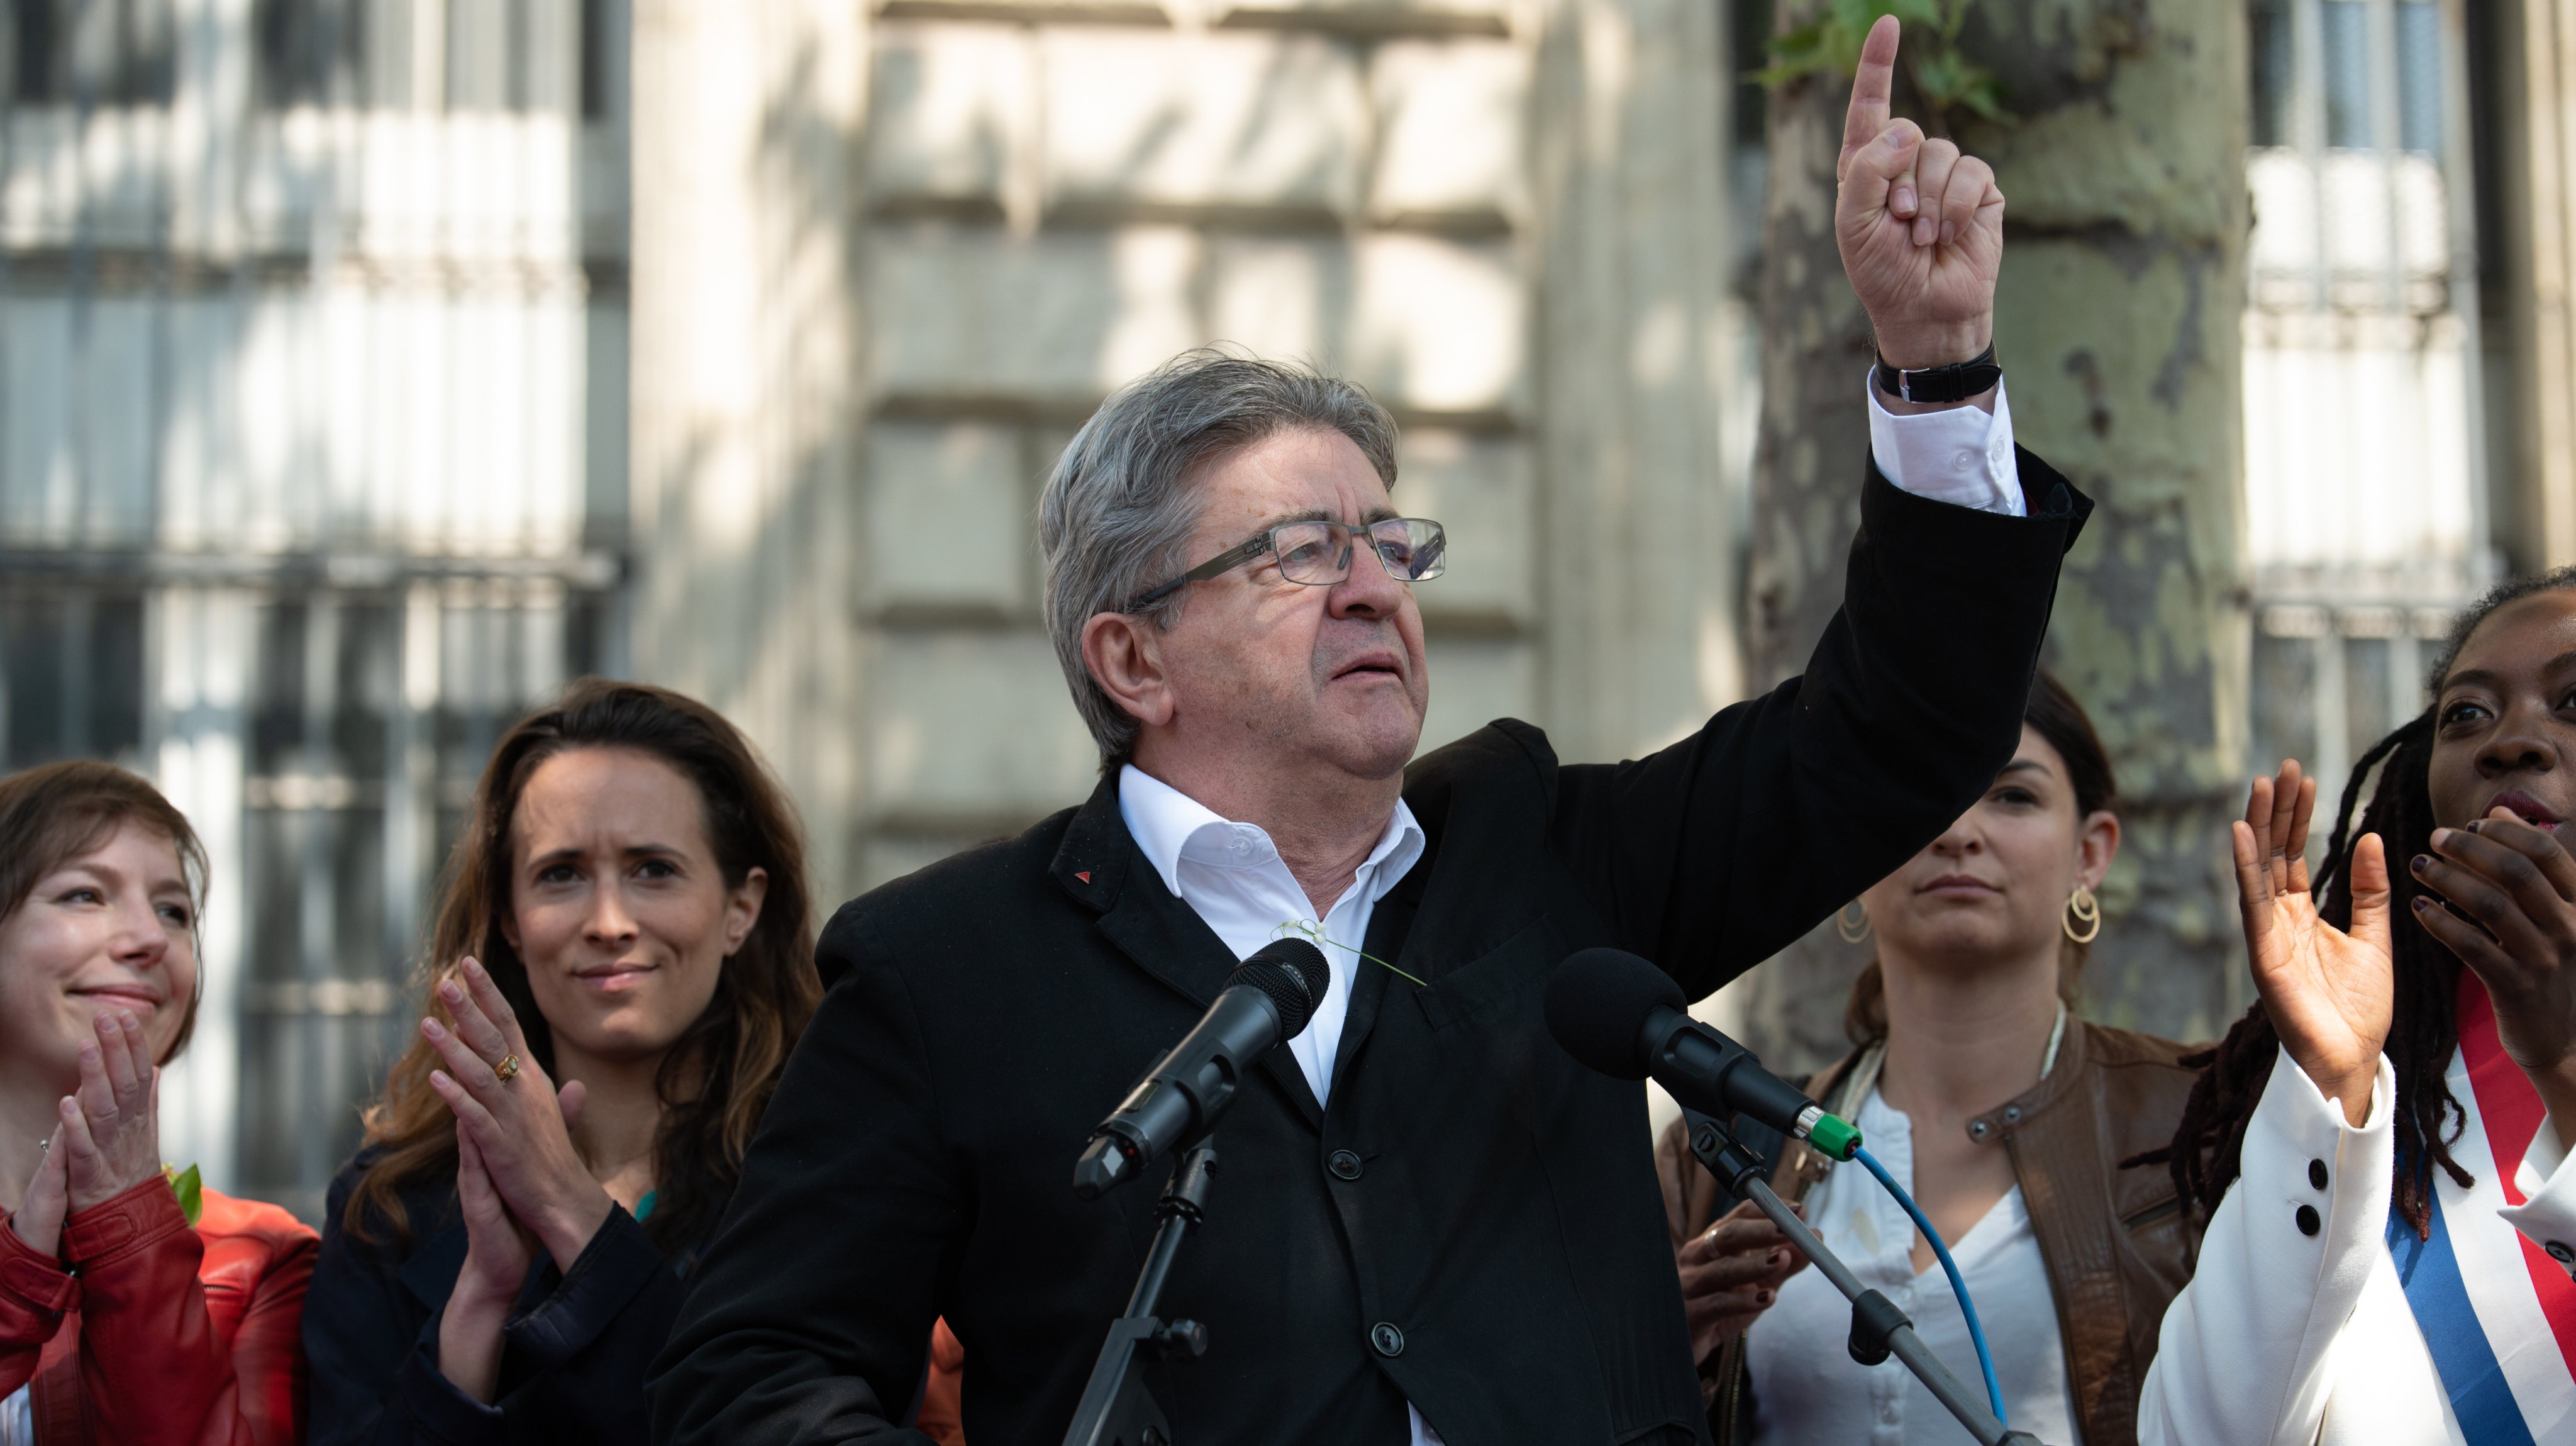 Jean-Luc Melenchon Speech During The Annual May Day (Labour Day) In Paris